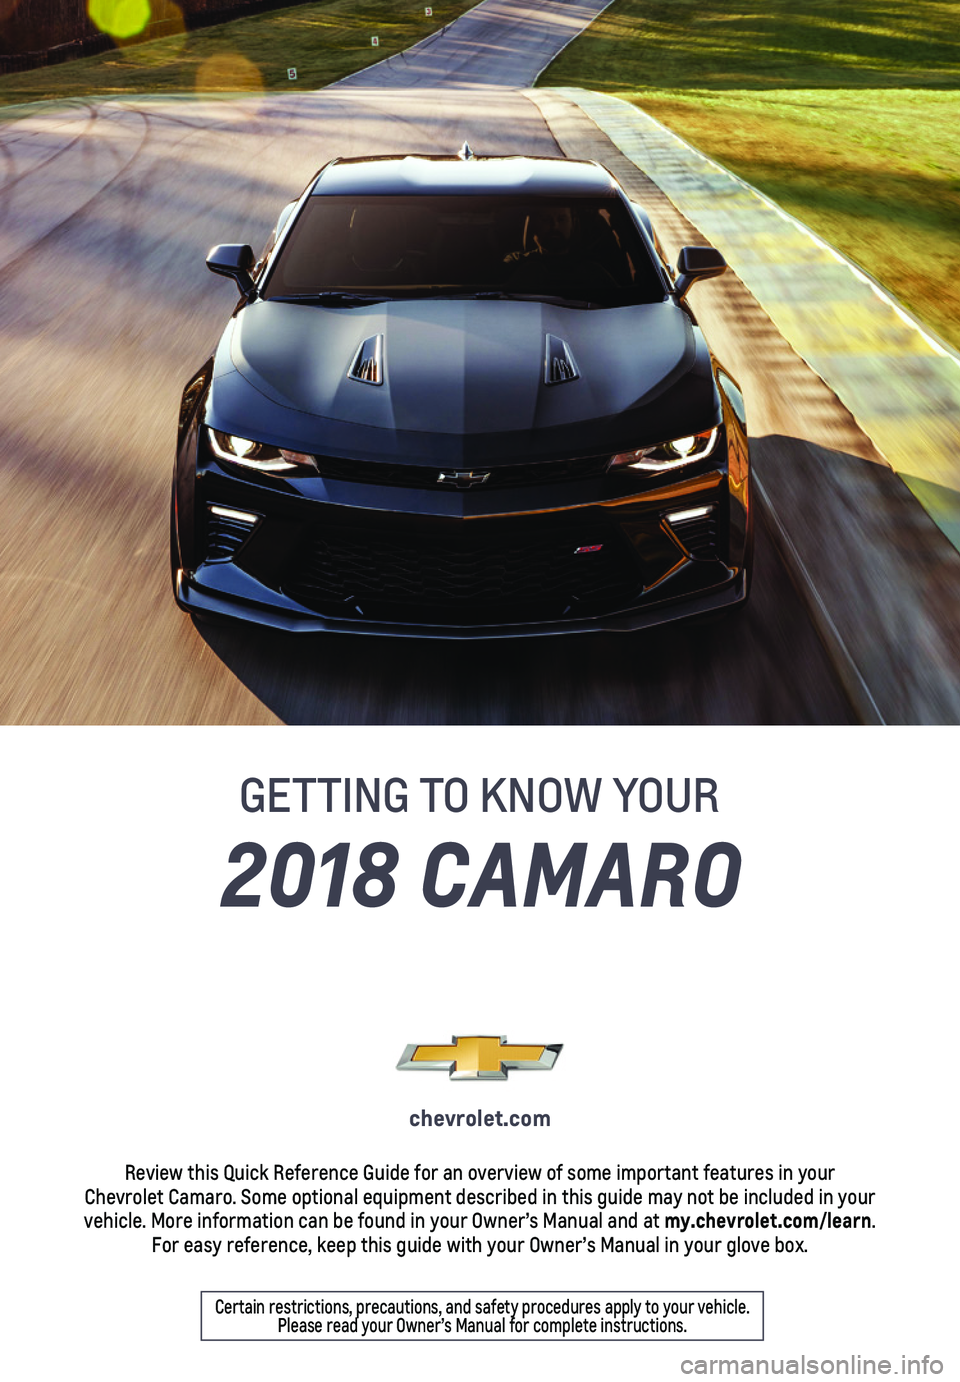 CHEVROLET CAMARO 2018  Get To Know Guide 2018 CAMARO
GETTING TO KNOW YOUR
chevrolet.com
Review this Quick Reference Guide for an overview of some important feat\
ures in your  Chevrolet Camaro. Some optional equipment described in this guide